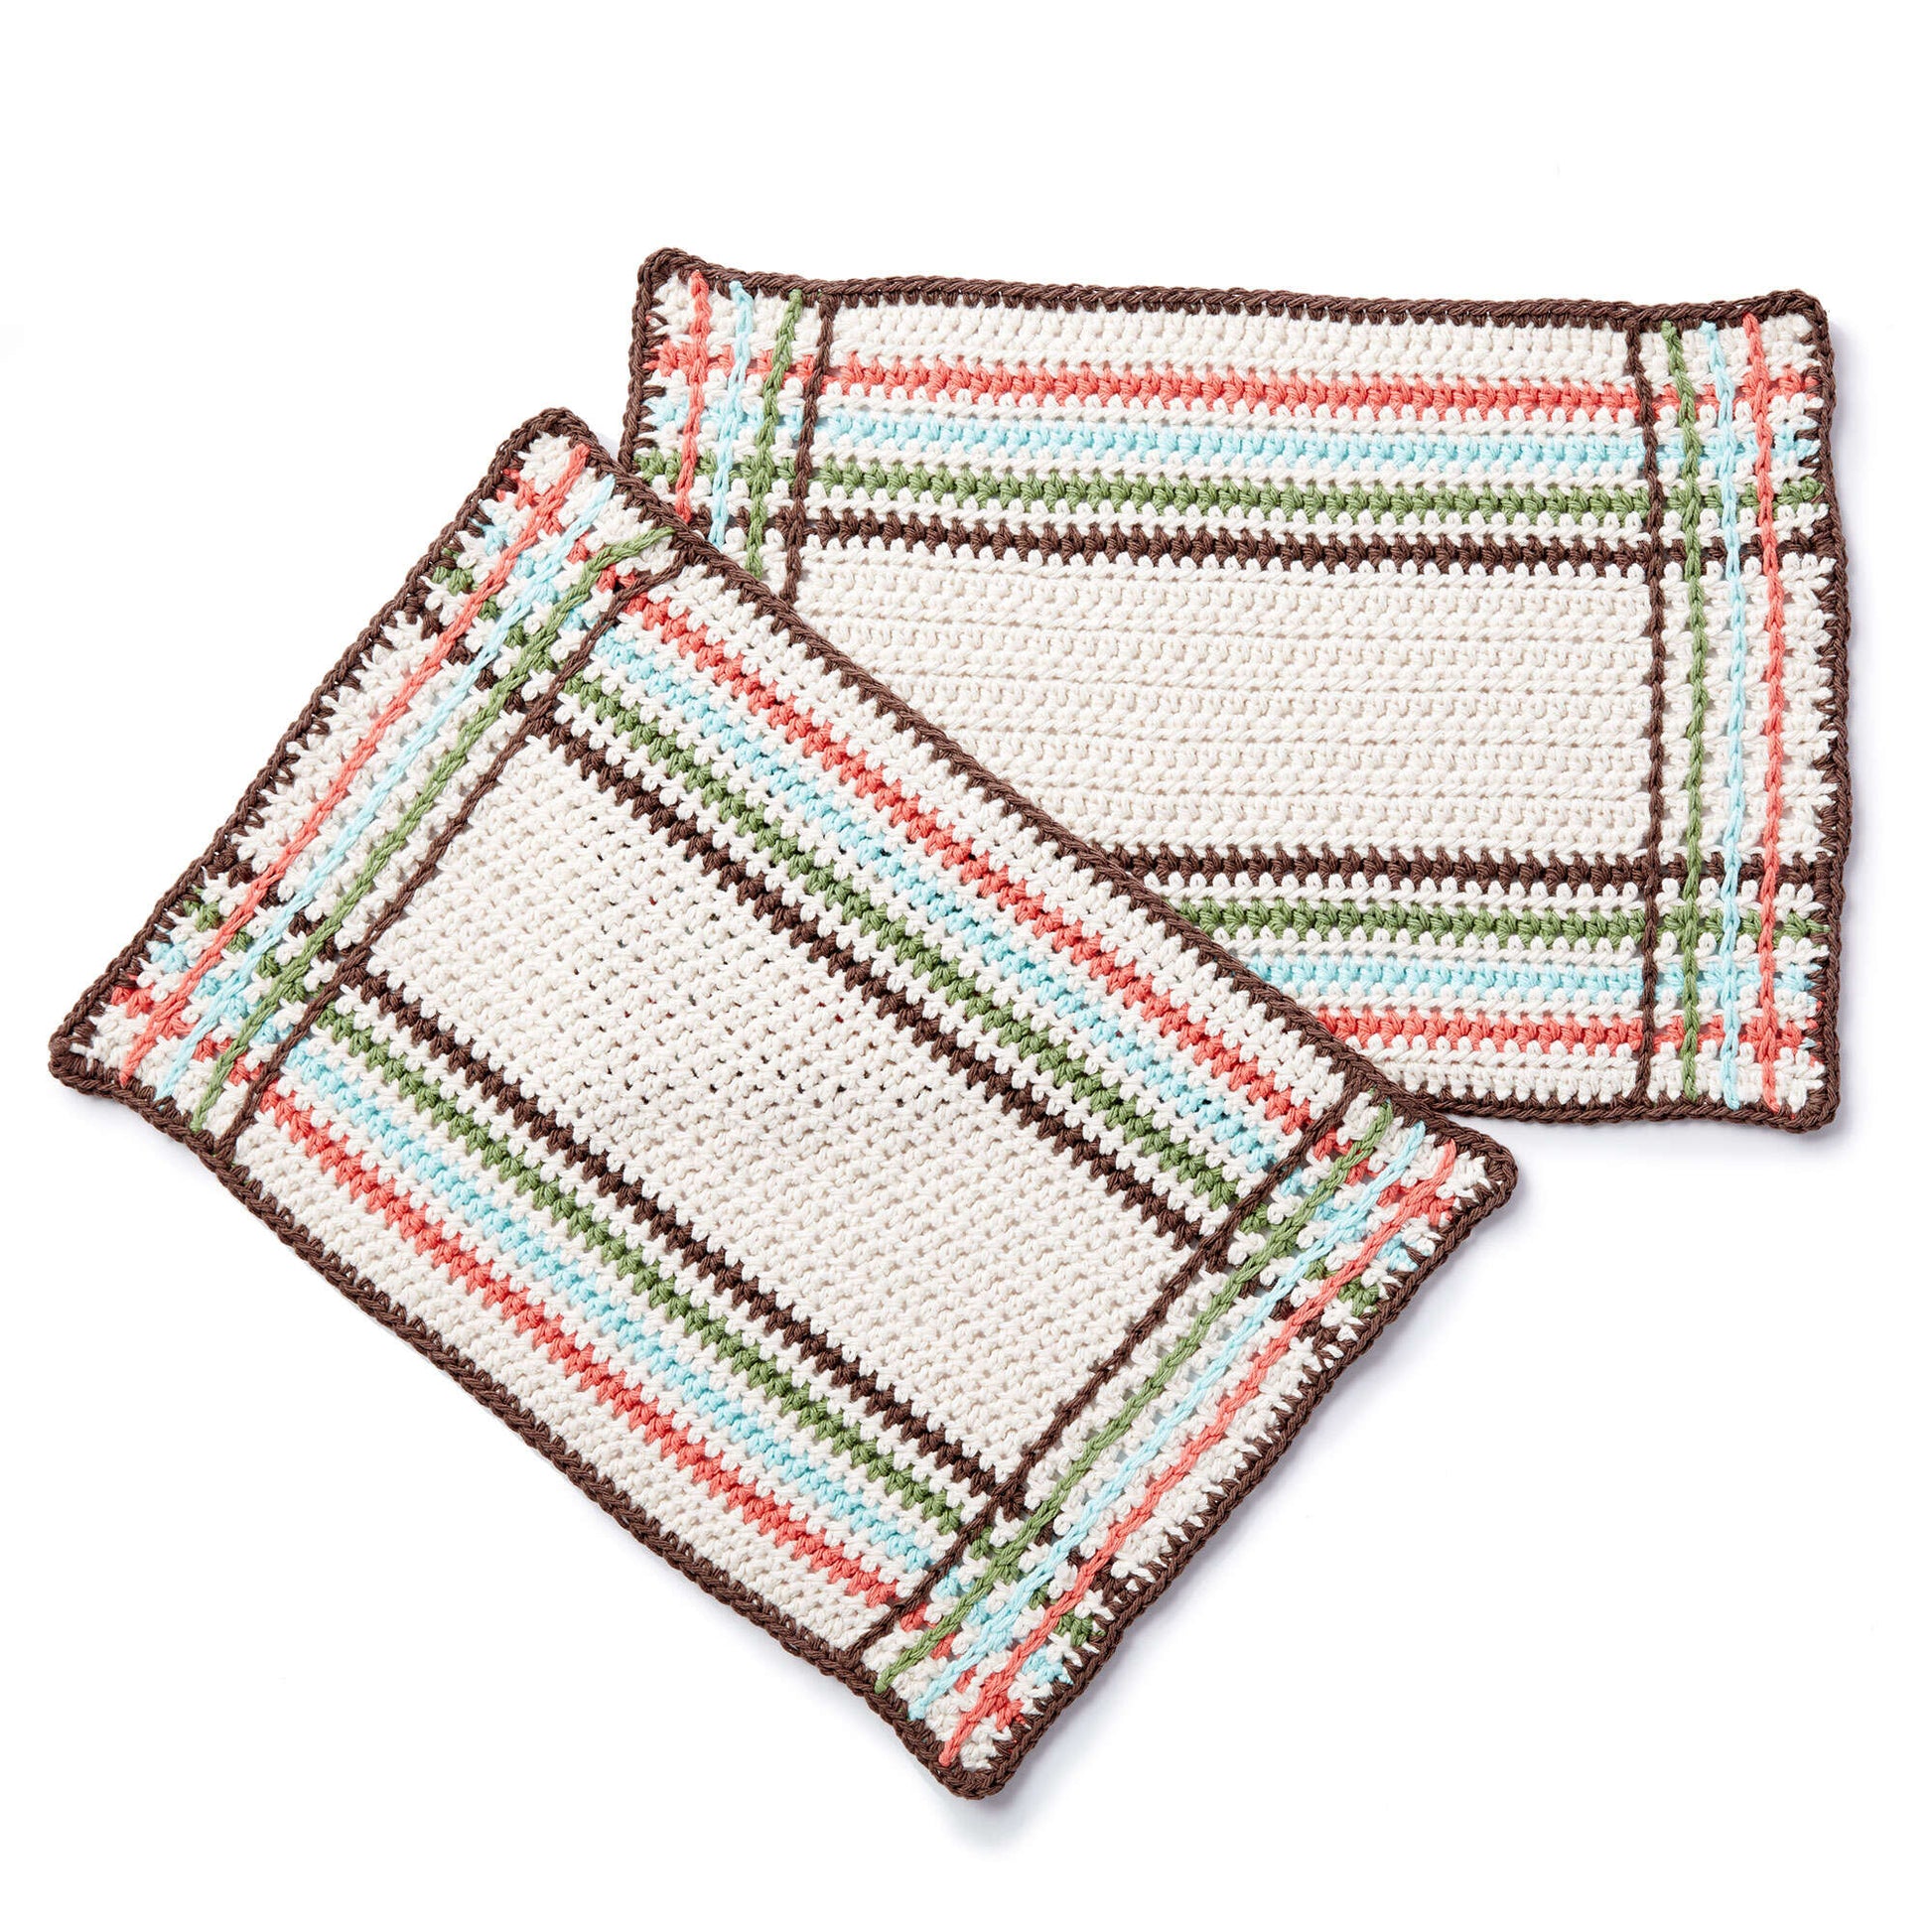 Lily Sugar'n Cream Mad For Plaid Crochet Placemat Single Size